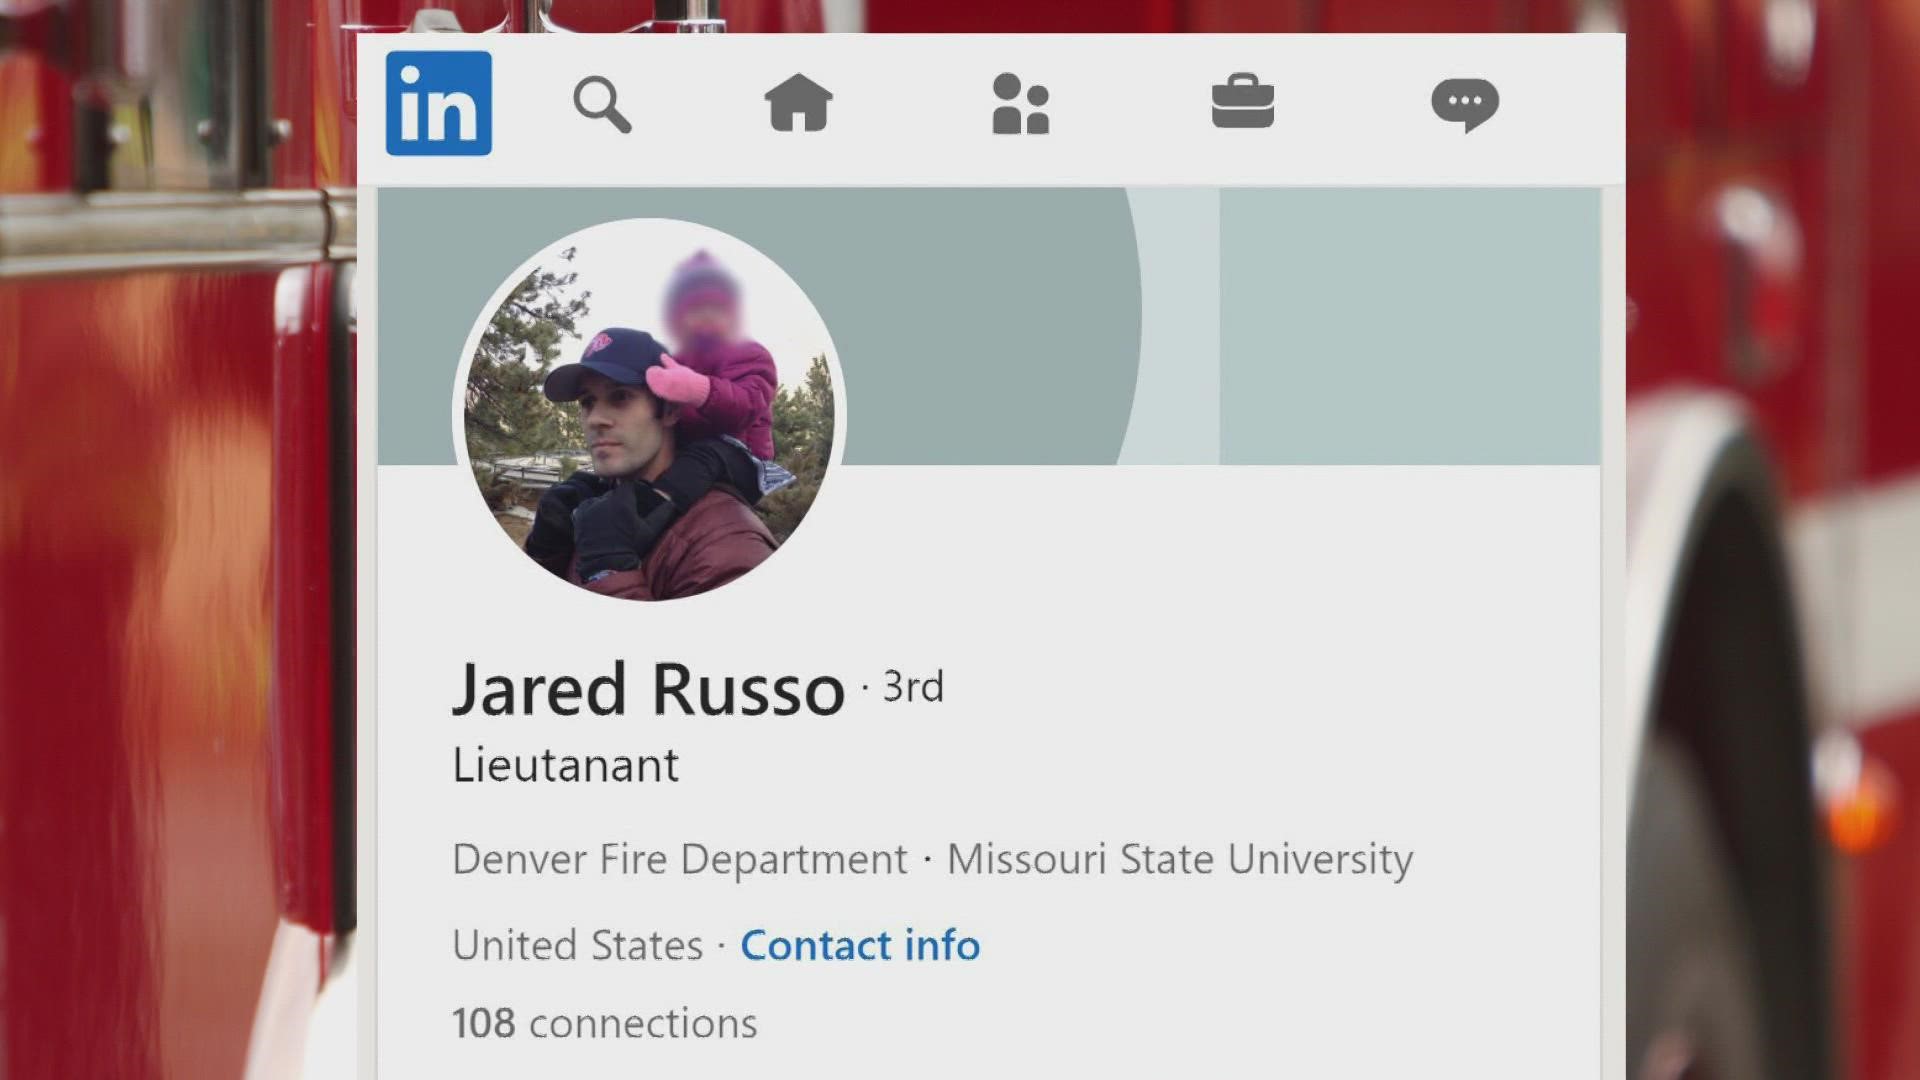 Lt. Jared Russo, who served for 12 years, has been fired for making a myriad racist jokes at several fire stations.